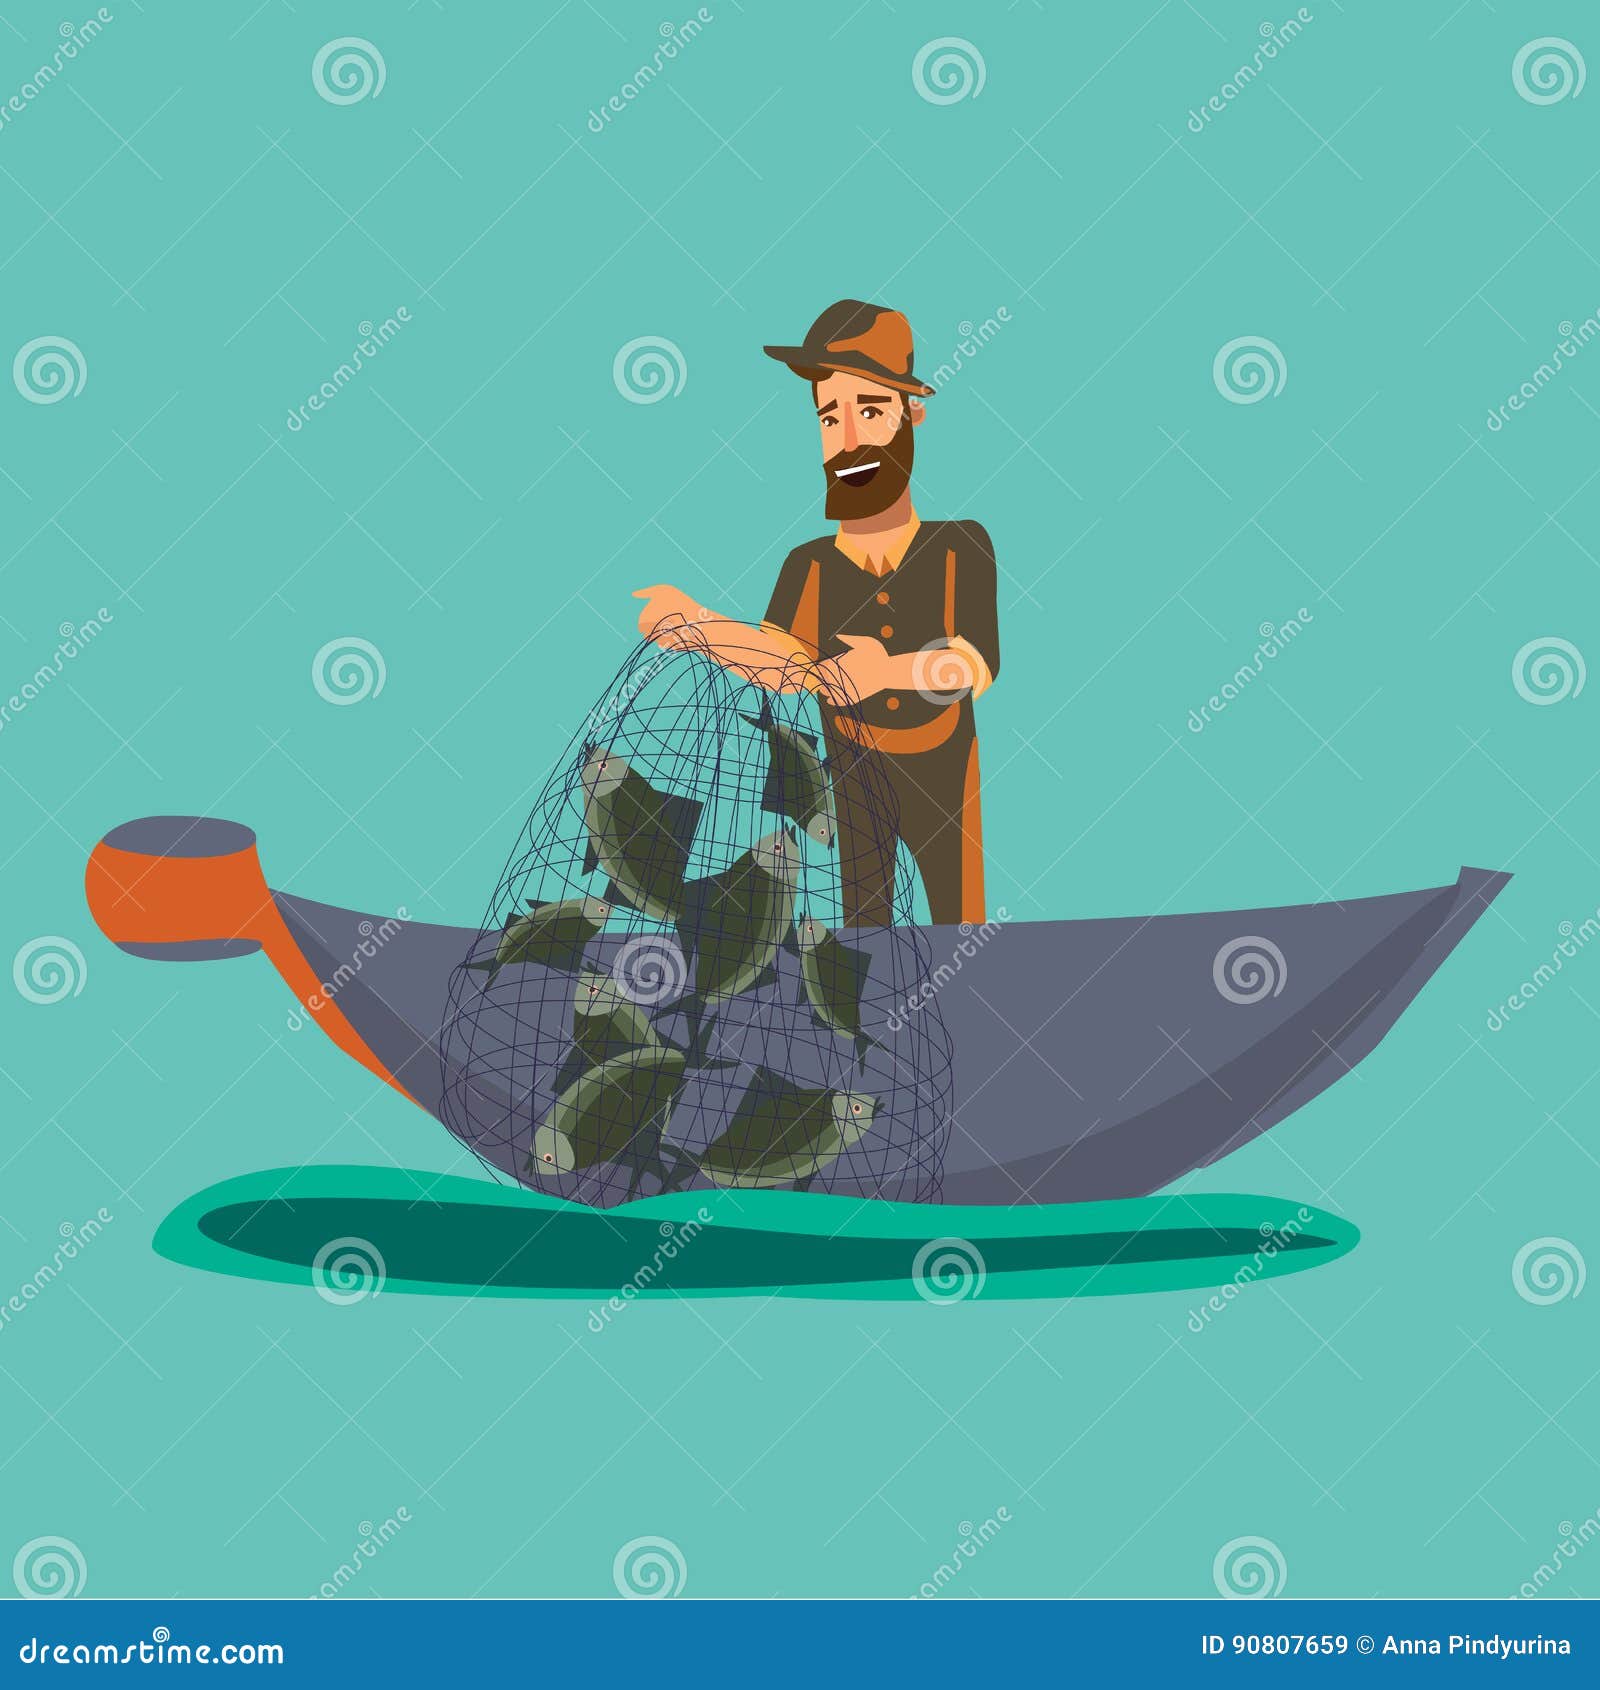 Cartoon Fisherman Standing in Hat and Pulls Net on Boat Out of